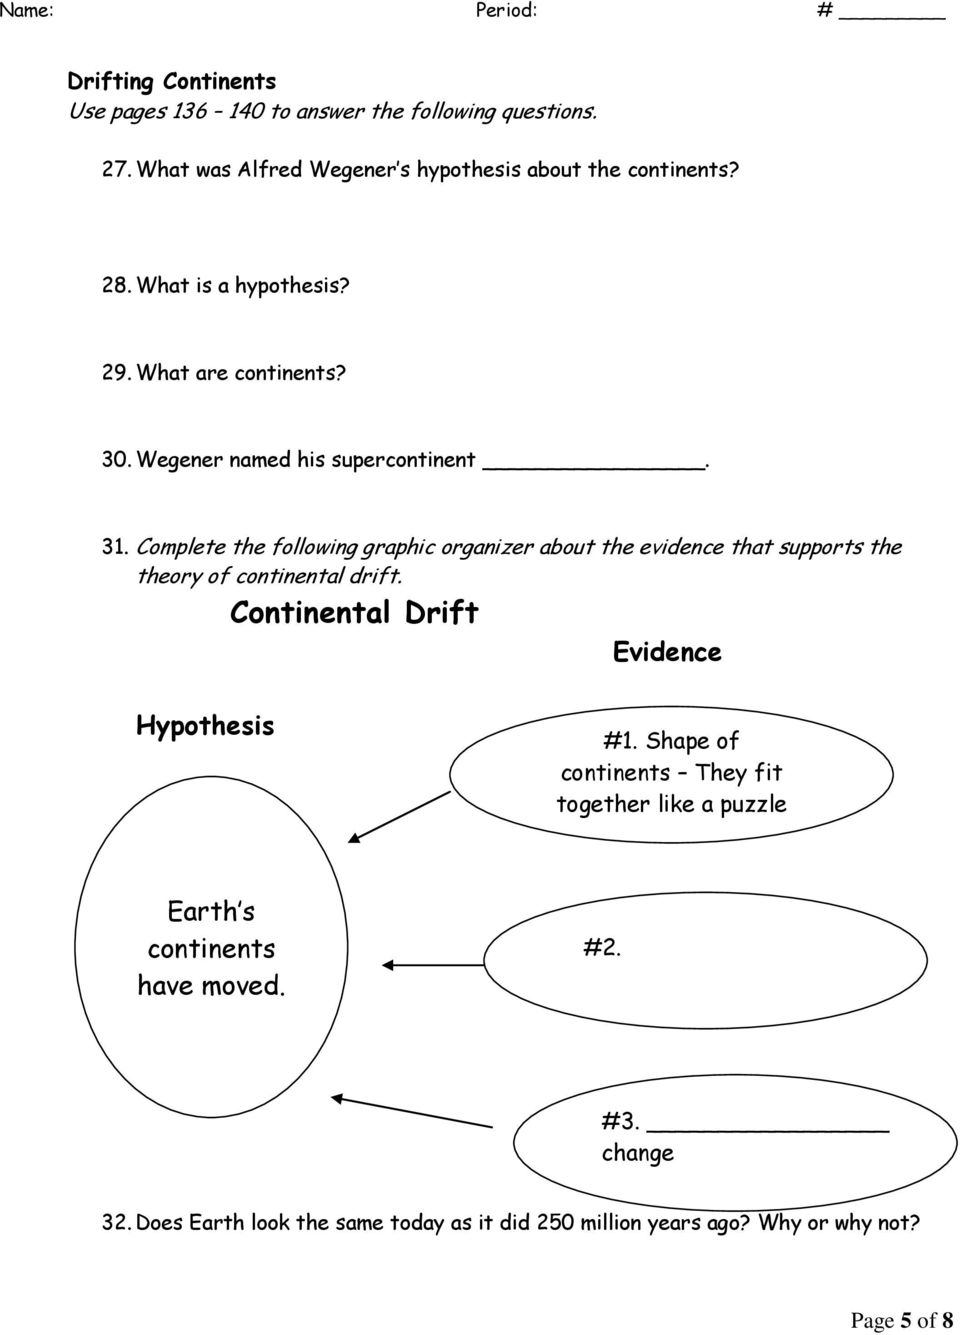 Complete the following graphic organizer about the evidence that supports the theory of continental drift.